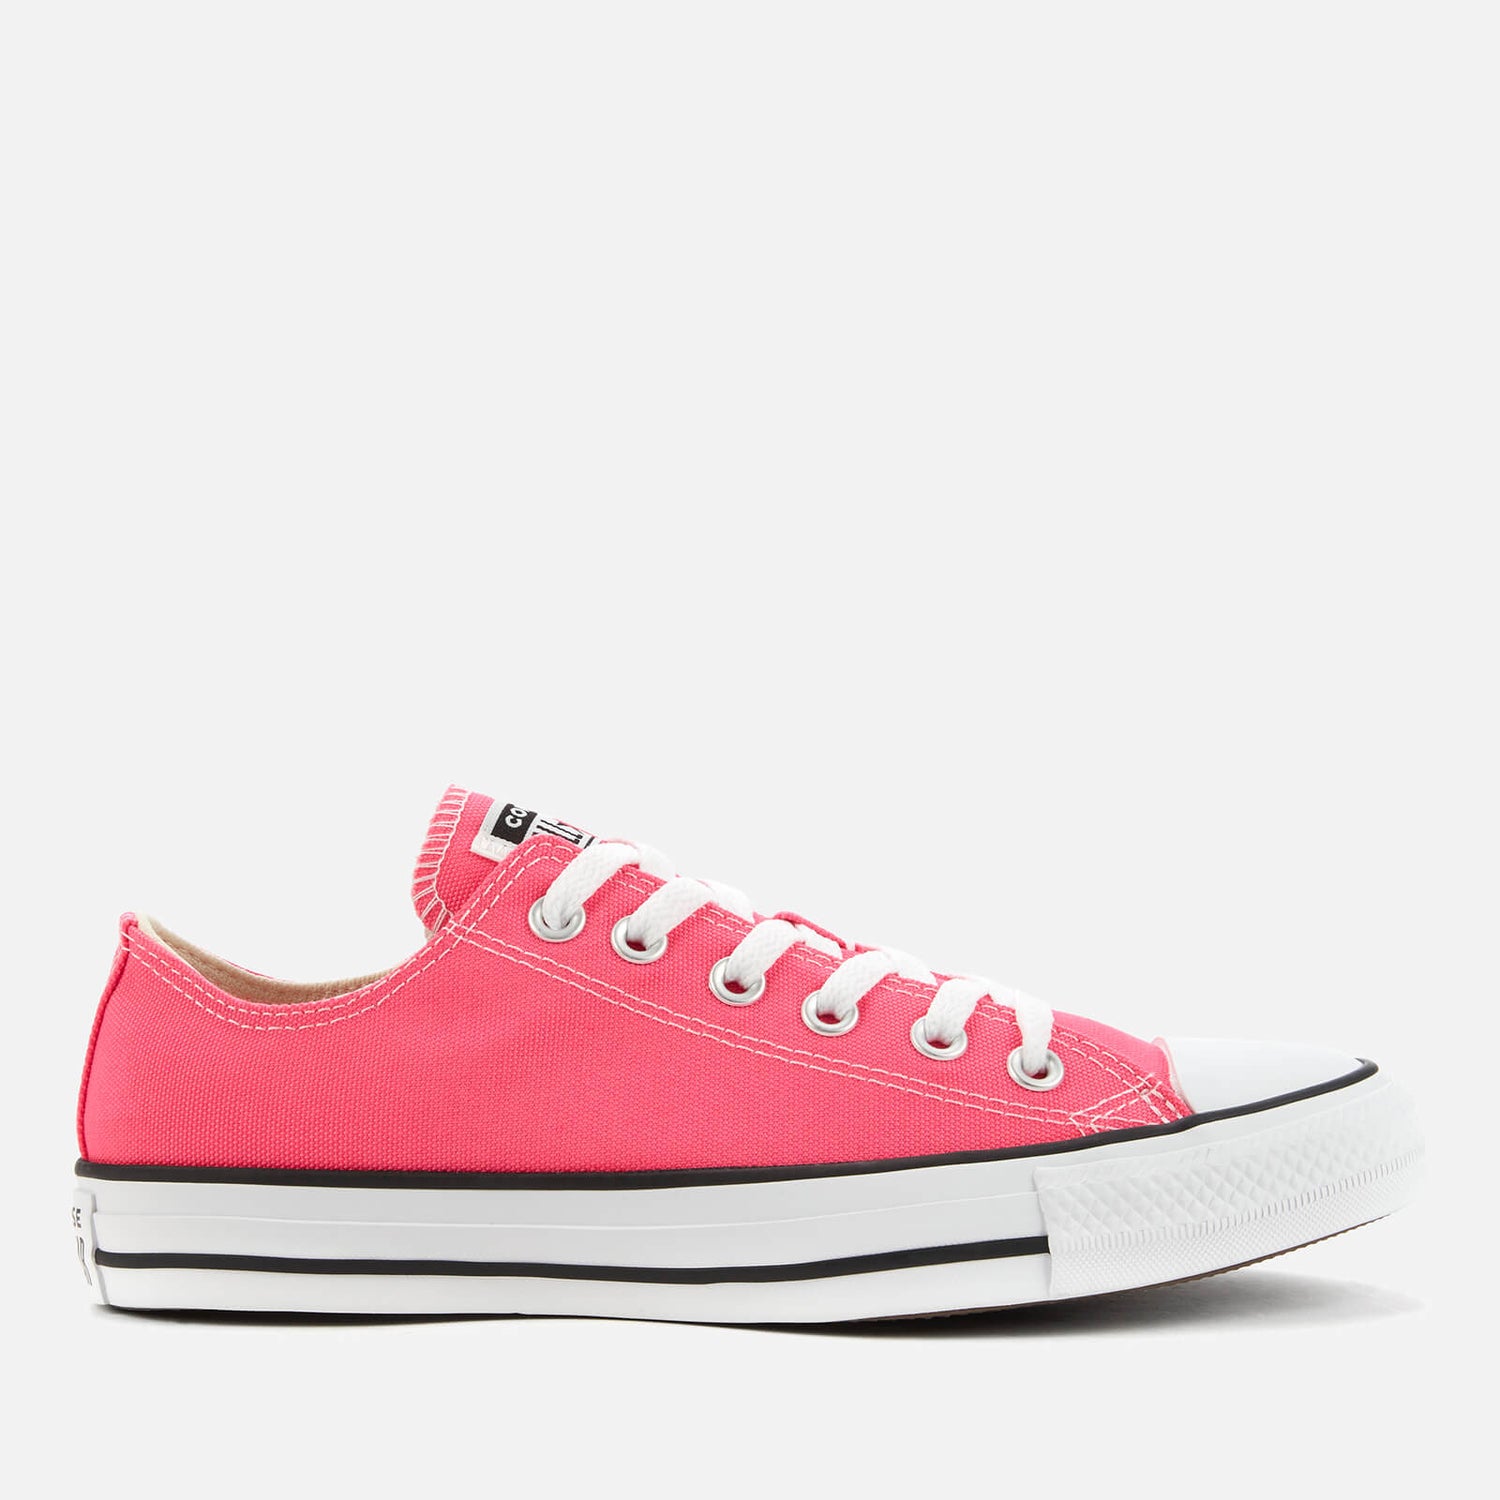 Converse Women's Chuck Taylor All Star Canvas Ox Trainers - Pink